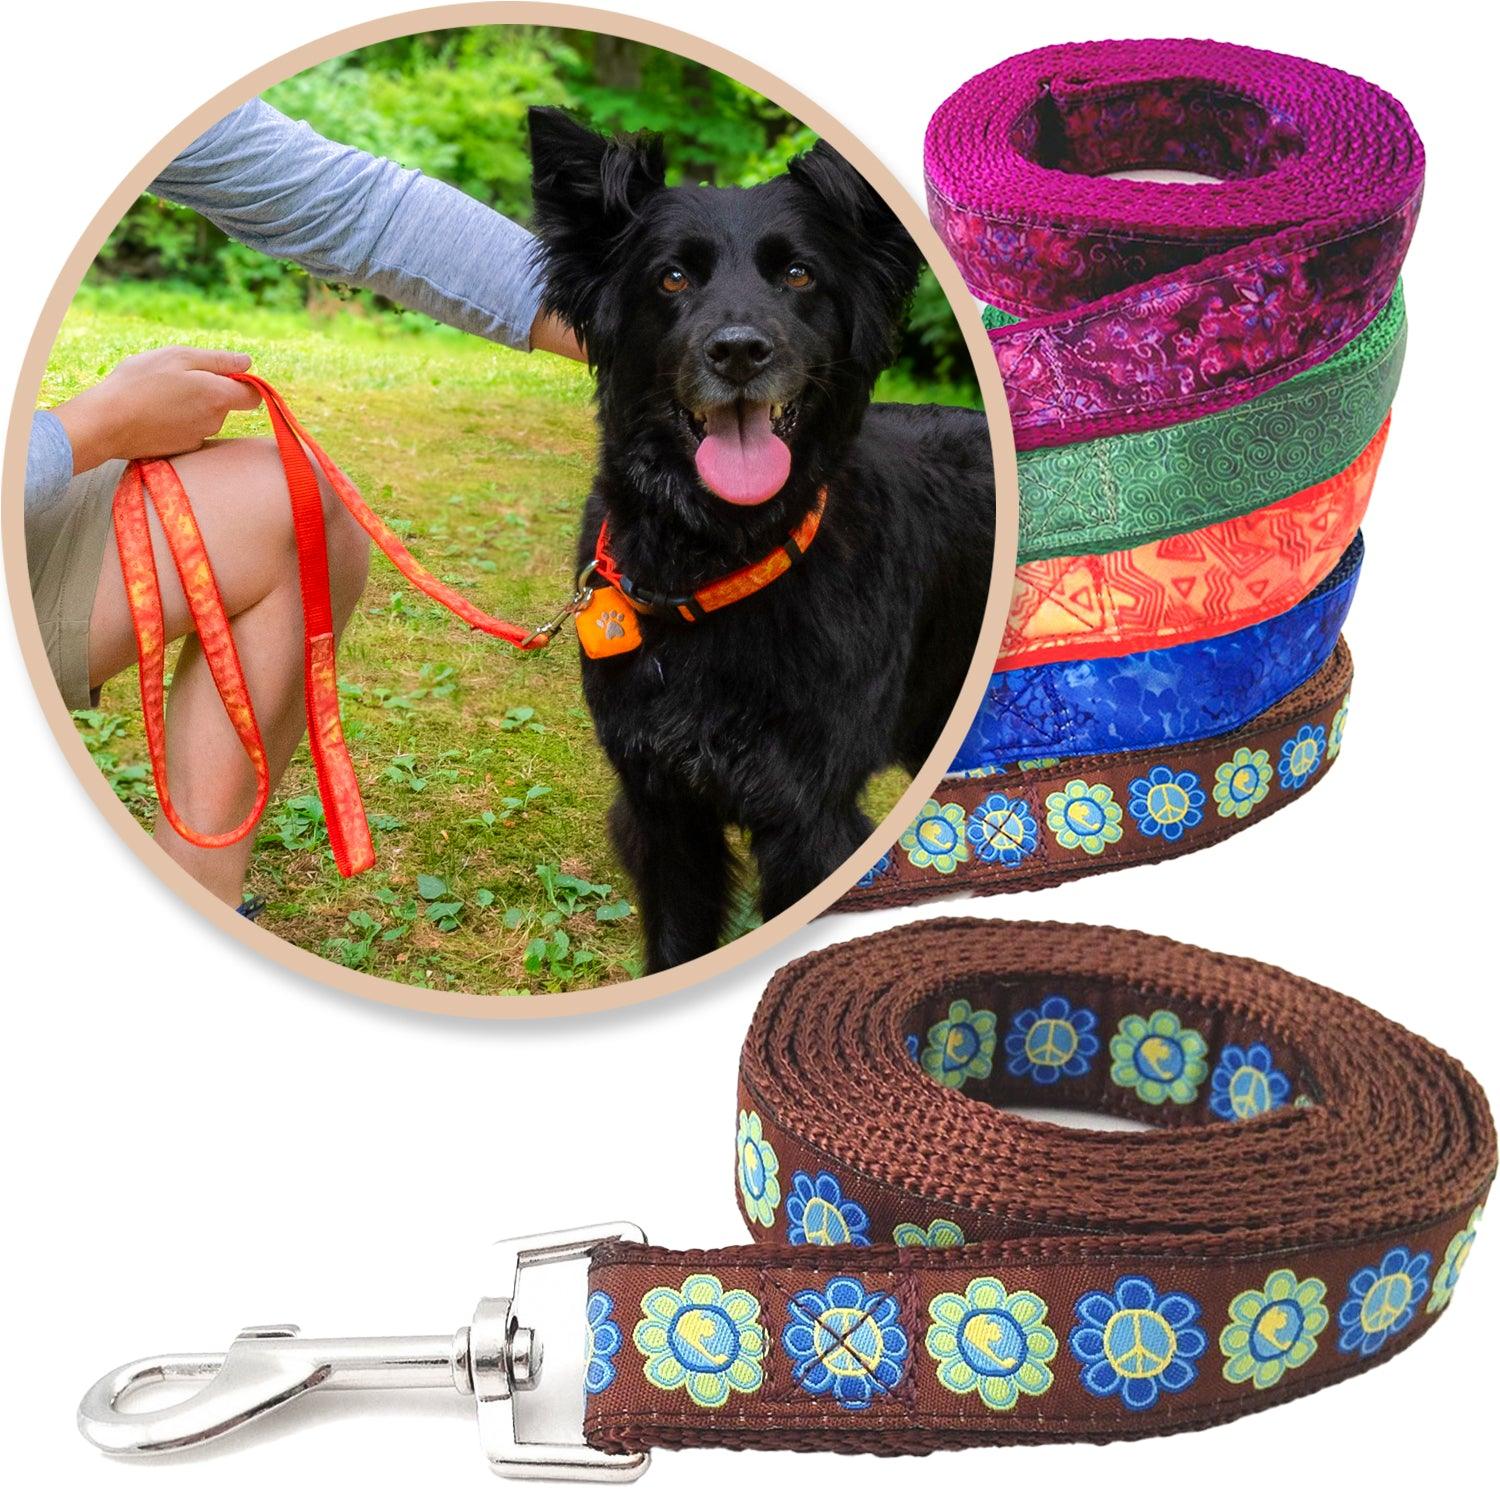 Brown batik inspired leash shown with a black dog and variety of colors and styles